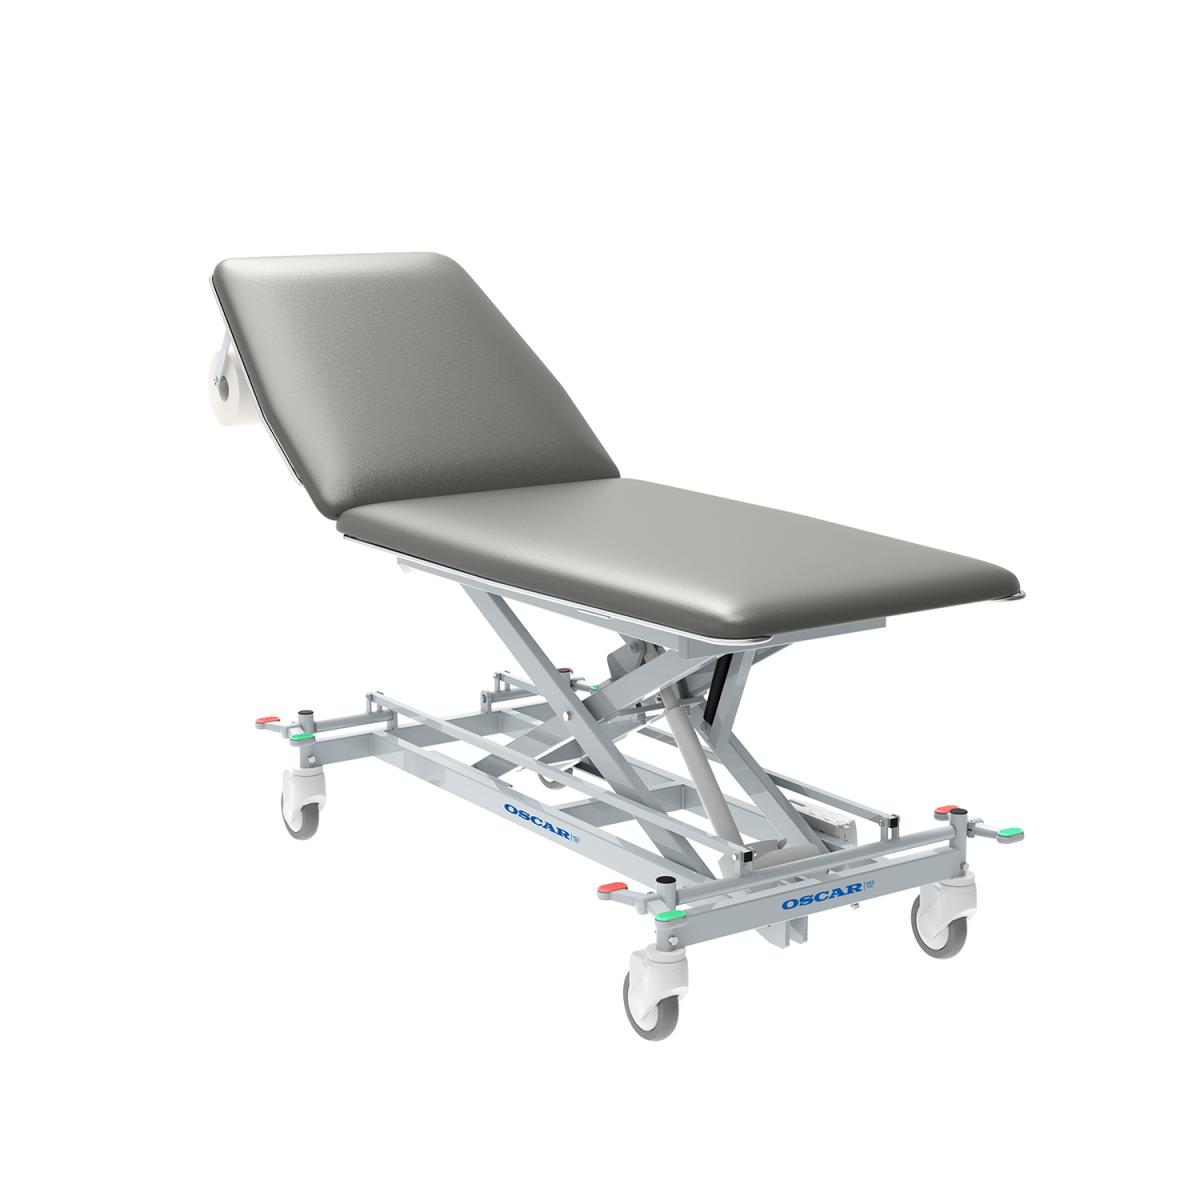 Examination table Standard, electric